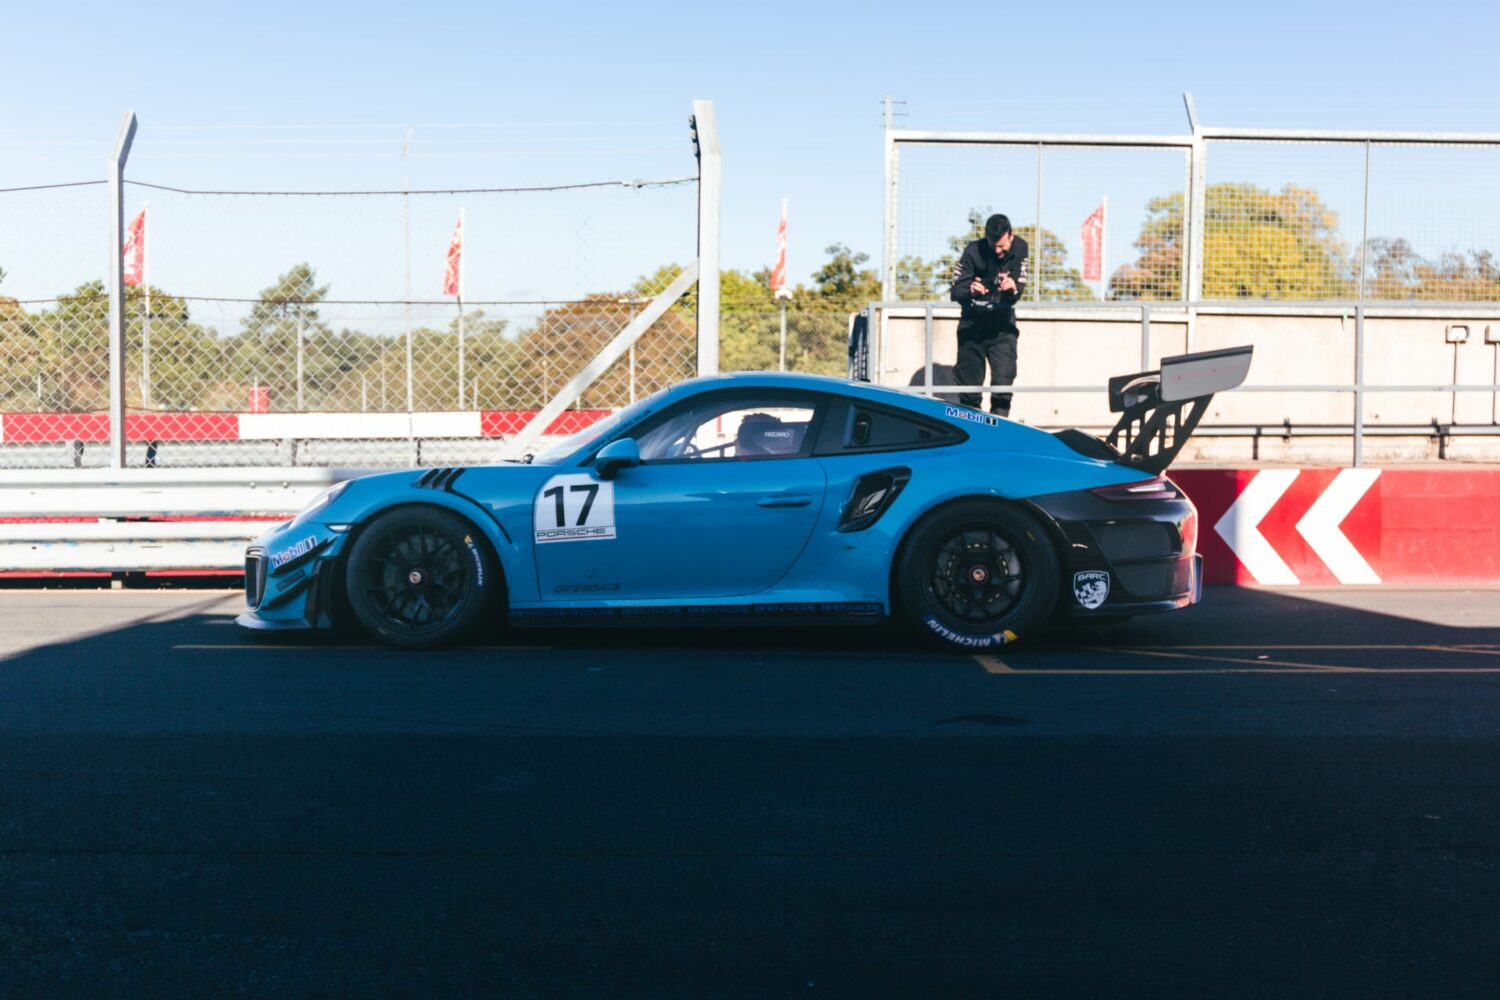 Porsche only trackday side